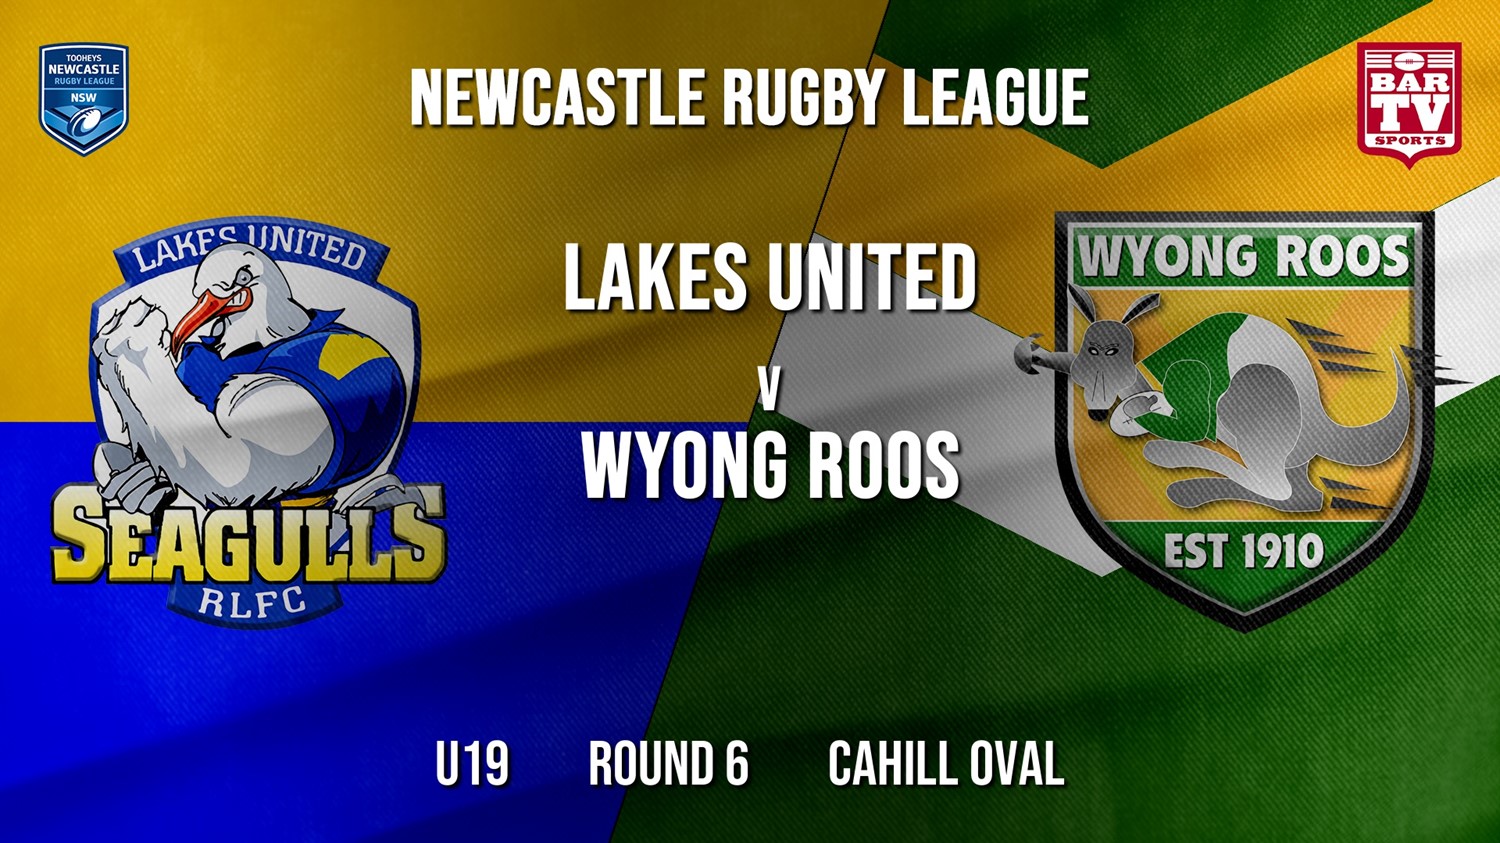 Newcastle Rugby League Round 6 - U19 - Lakes United v Wyong Roos Slate Image